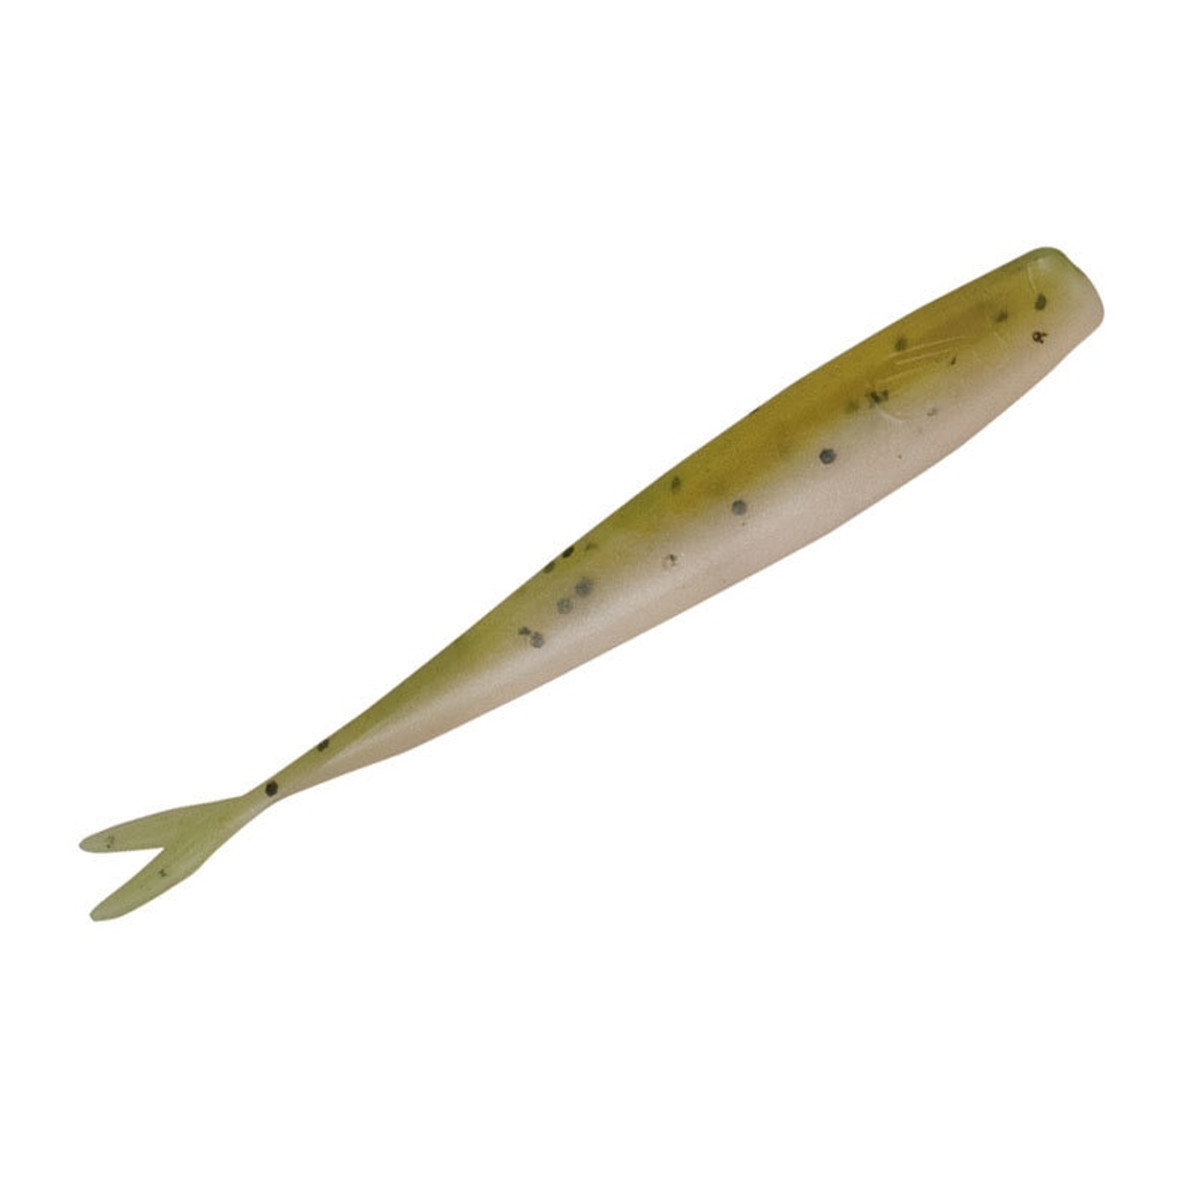 Micro Minnow - JT Outdoor Products